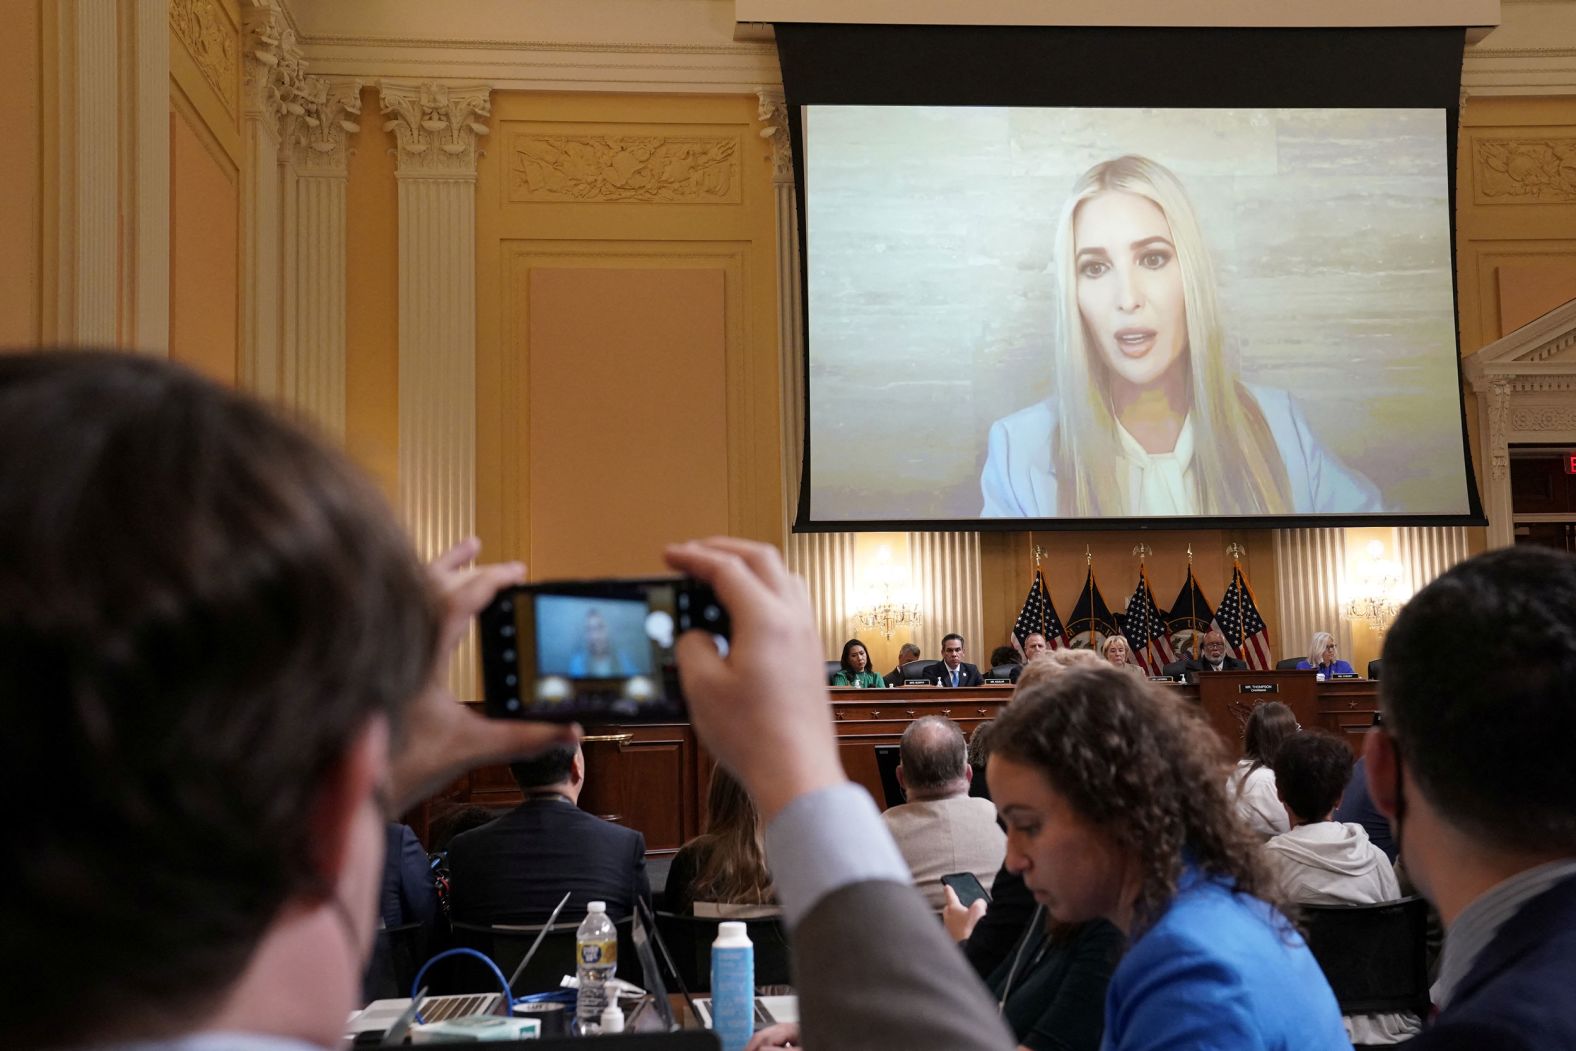 Former White House Senior Adviser Ivanka Trump is seen on a video screen as <a href="index.php?page=&url=https%3A%2F%2Fwww.cnn.com%2Fpolitics%2Flive-news%2Fjanuary-6-hearings-june-9%2Fh_27be376e9a15bebd7ba4991271b2de94" target="_blank">a clip of her testimony</a> is played during the first hearing. In the clip, she said she accepted there was no fraud sufficient to overturn the election.